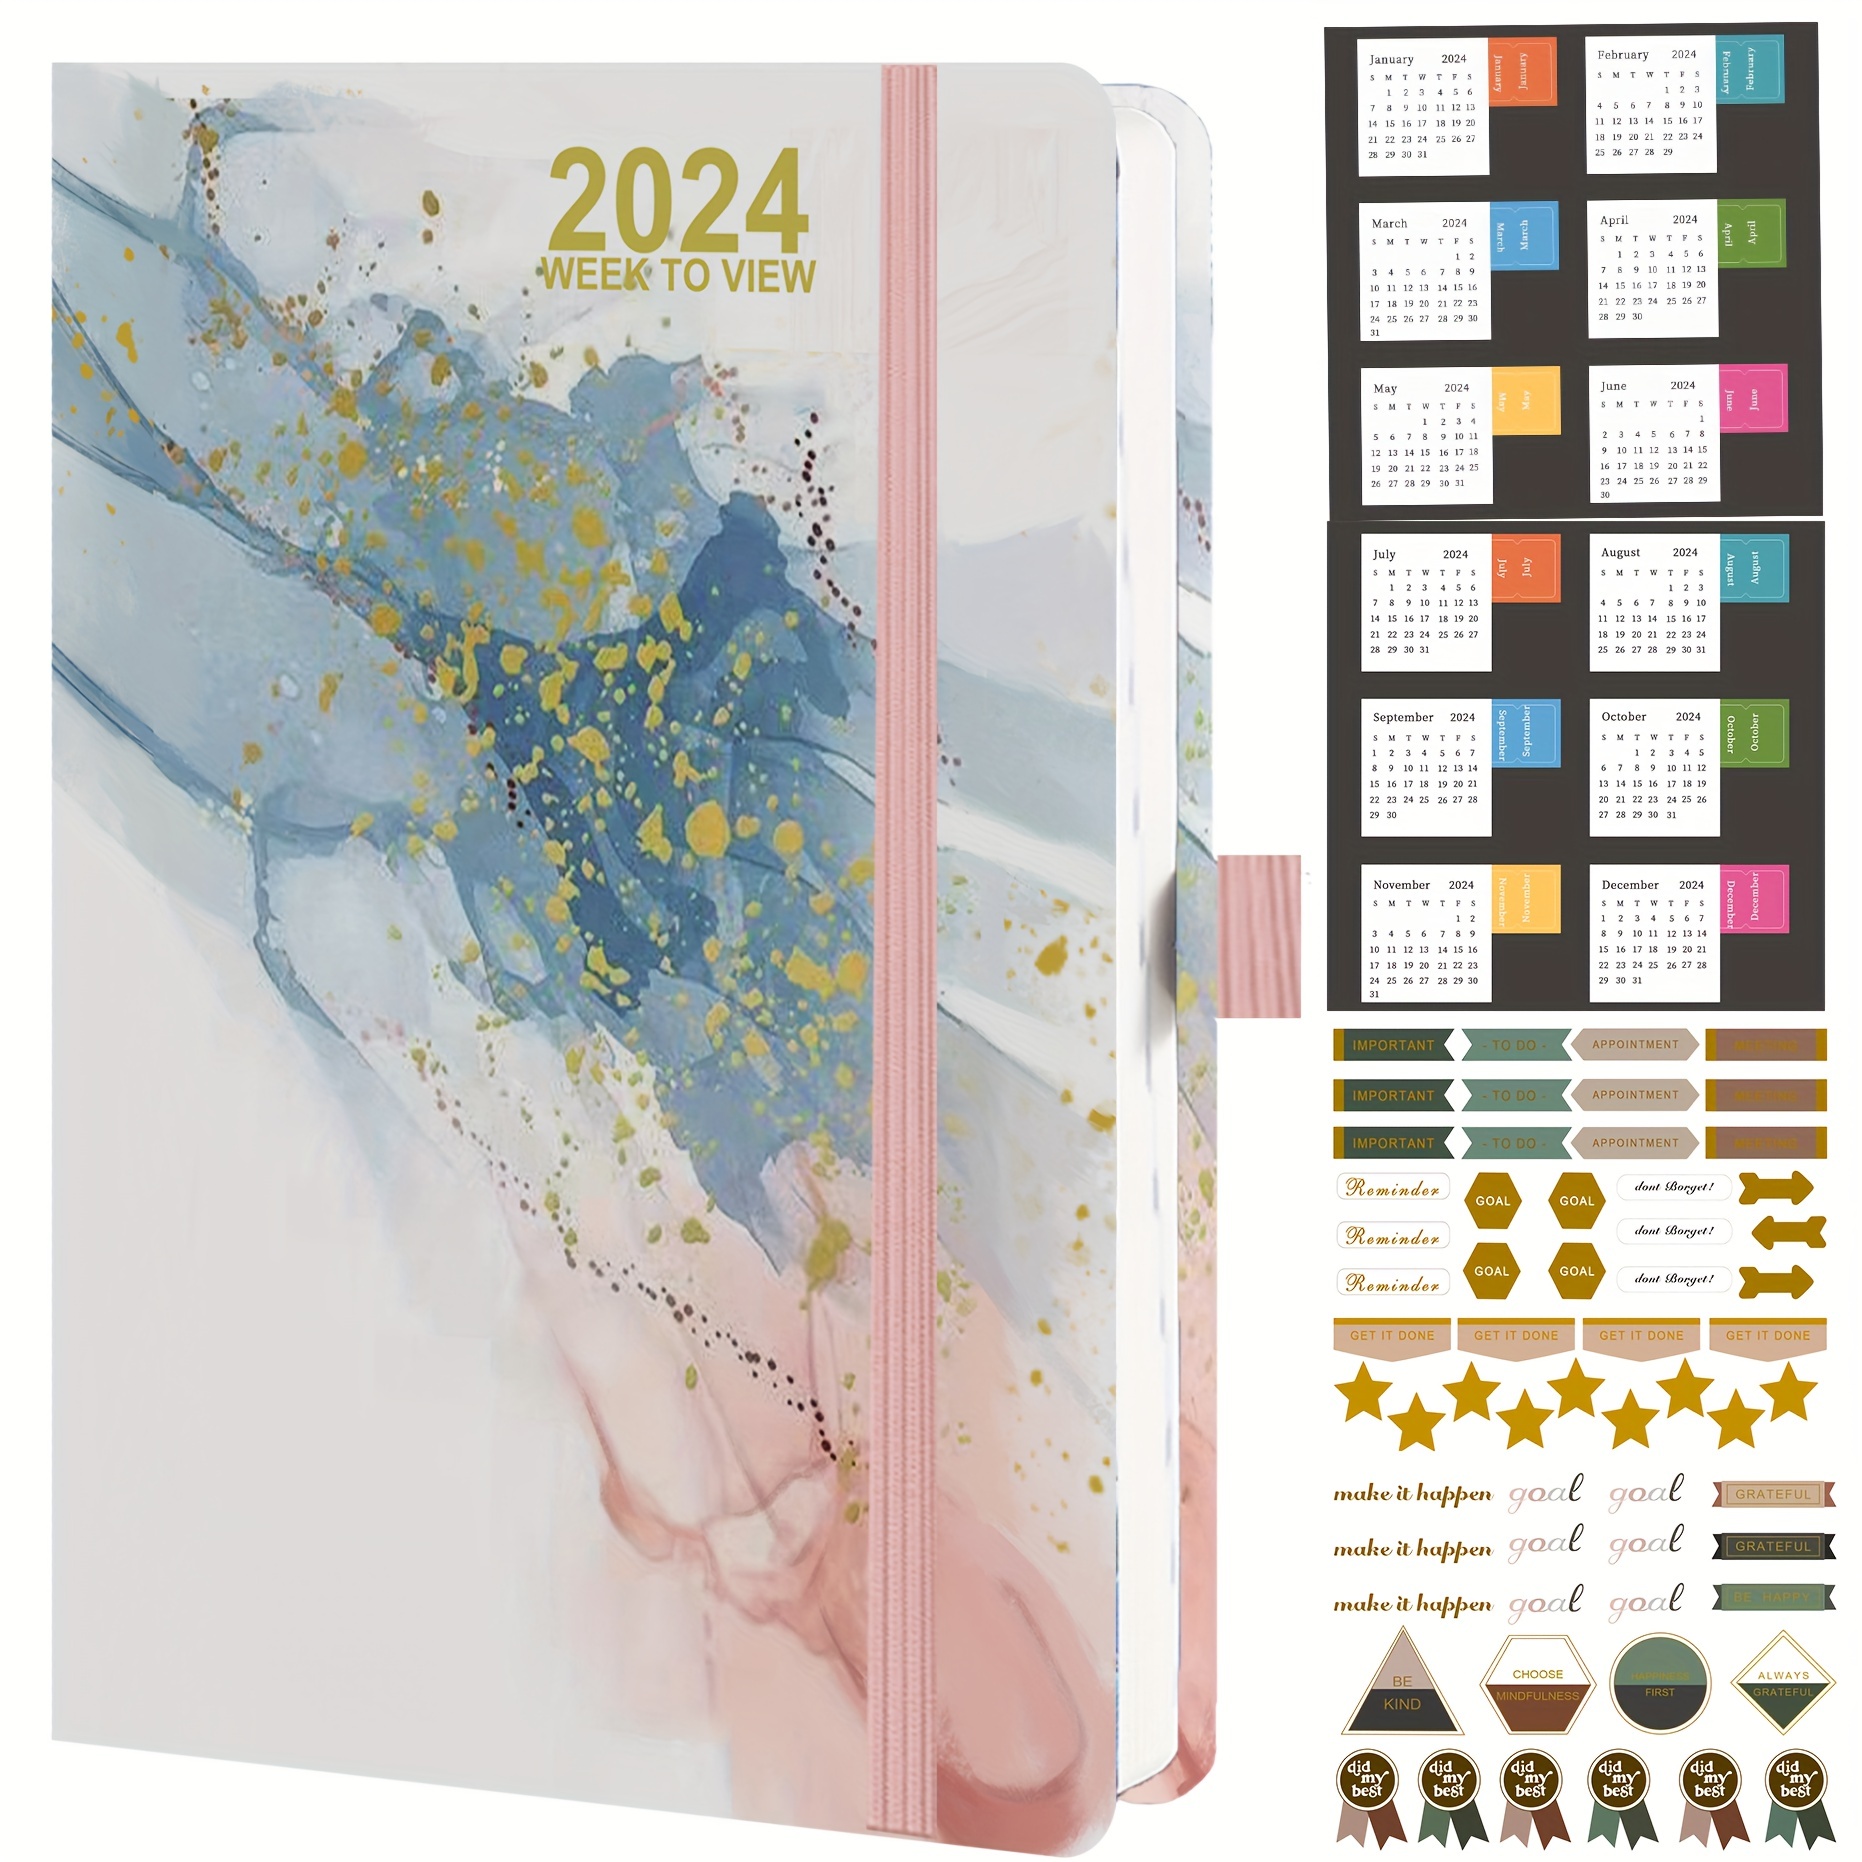 2022 New 1pc Colorful Journal Notebook Girls Personal Diary Writing Book  Reminder Gift For Women And Girls 200 Pages